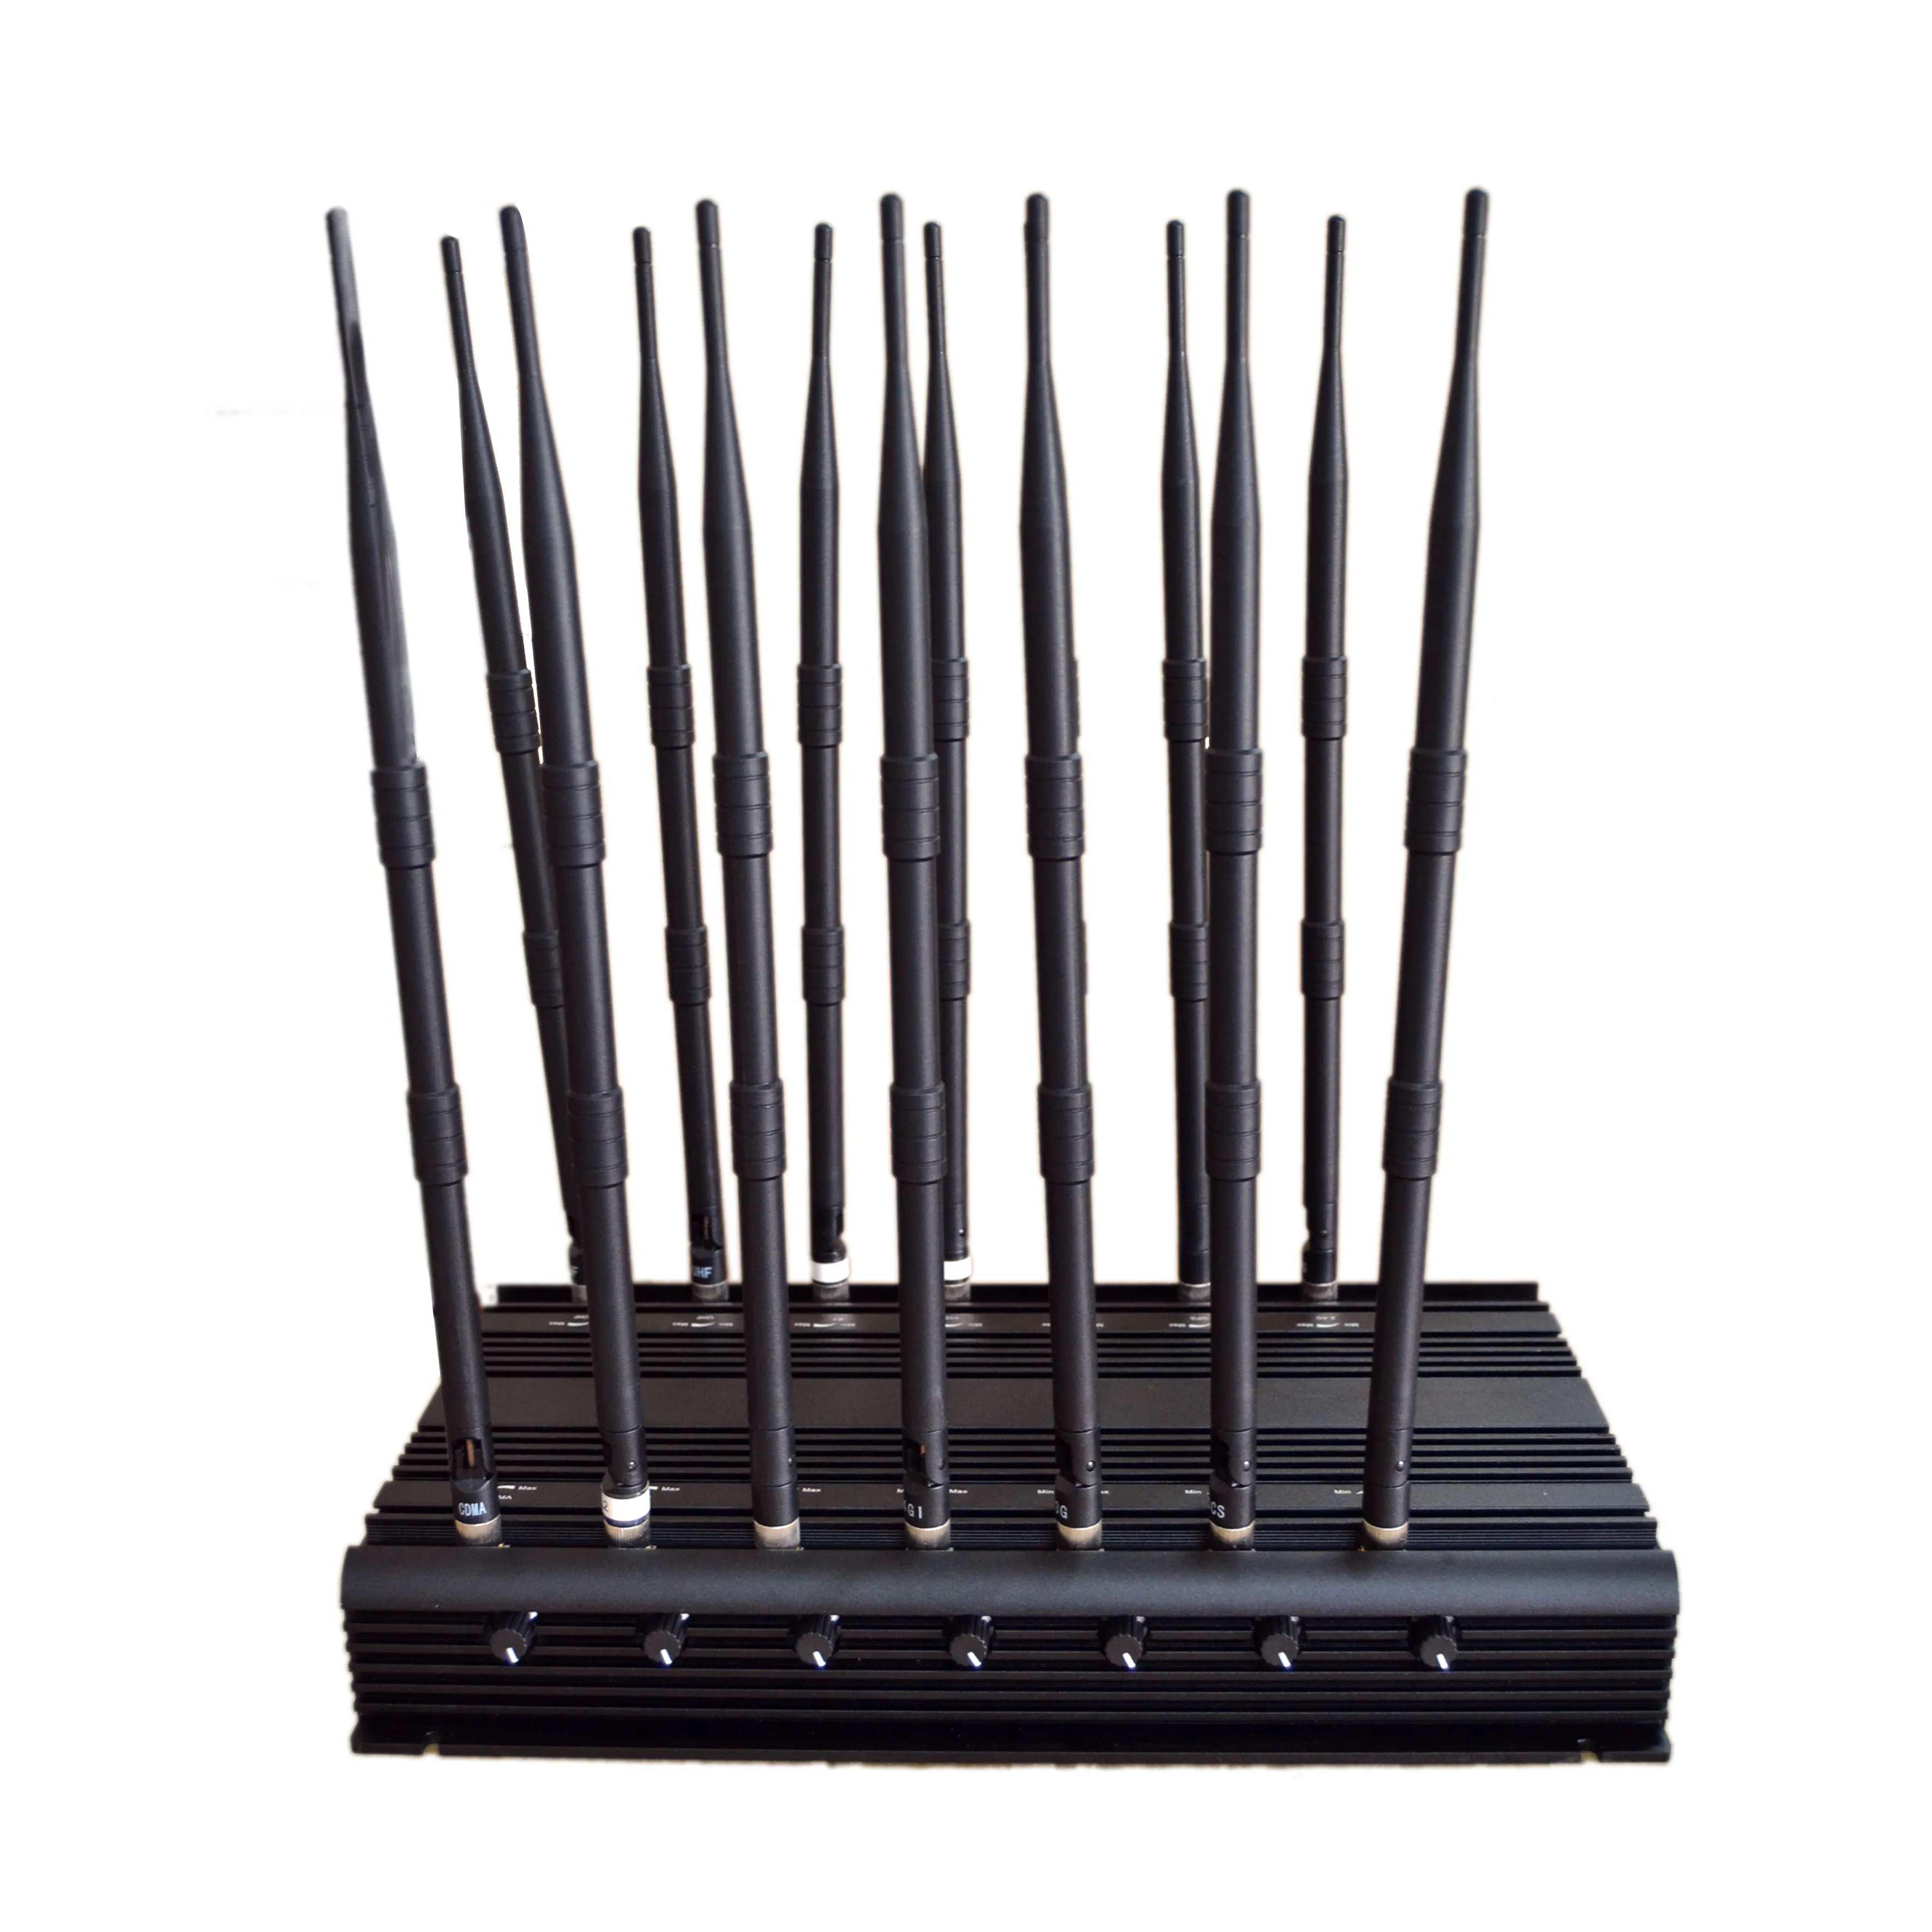  Adjustable Signal Jammer Review